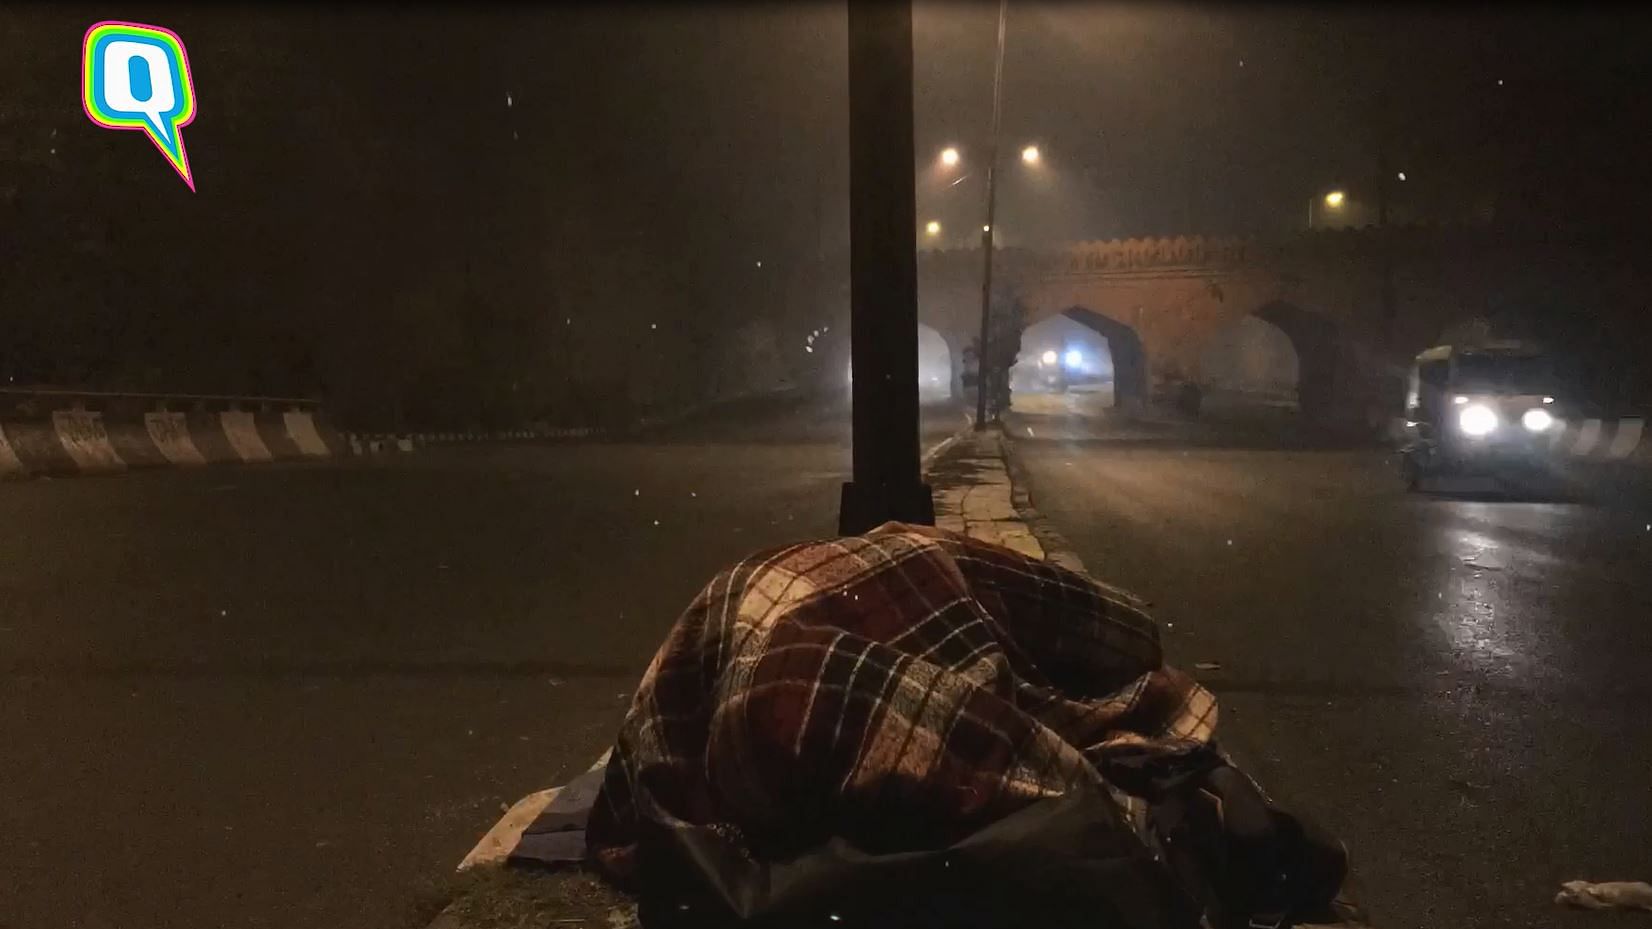 I slept on the divider for one night and here is what I learned about homelessness. 